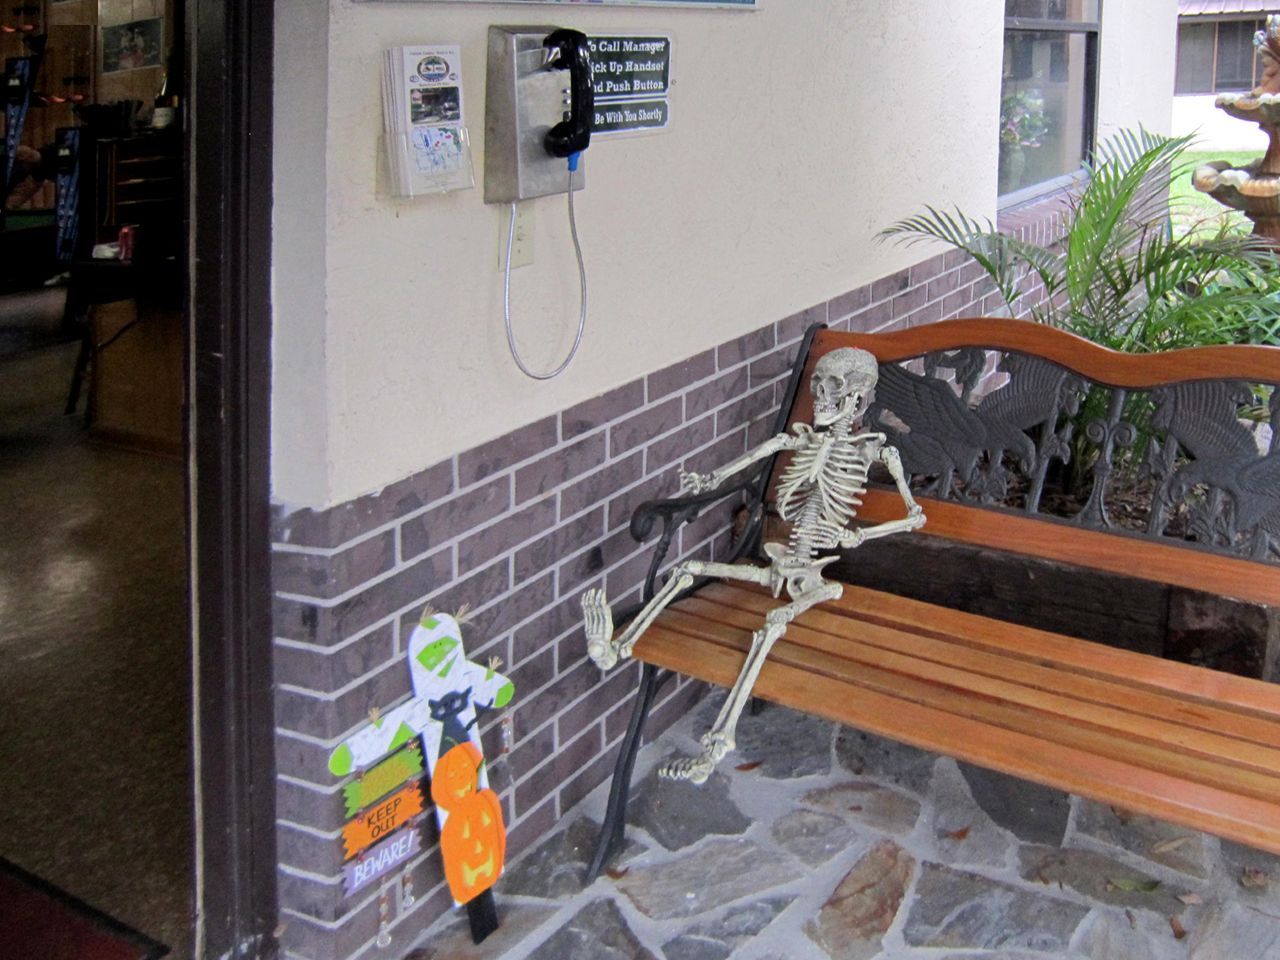 a skeleton is sitting on a bench next to a pay phone